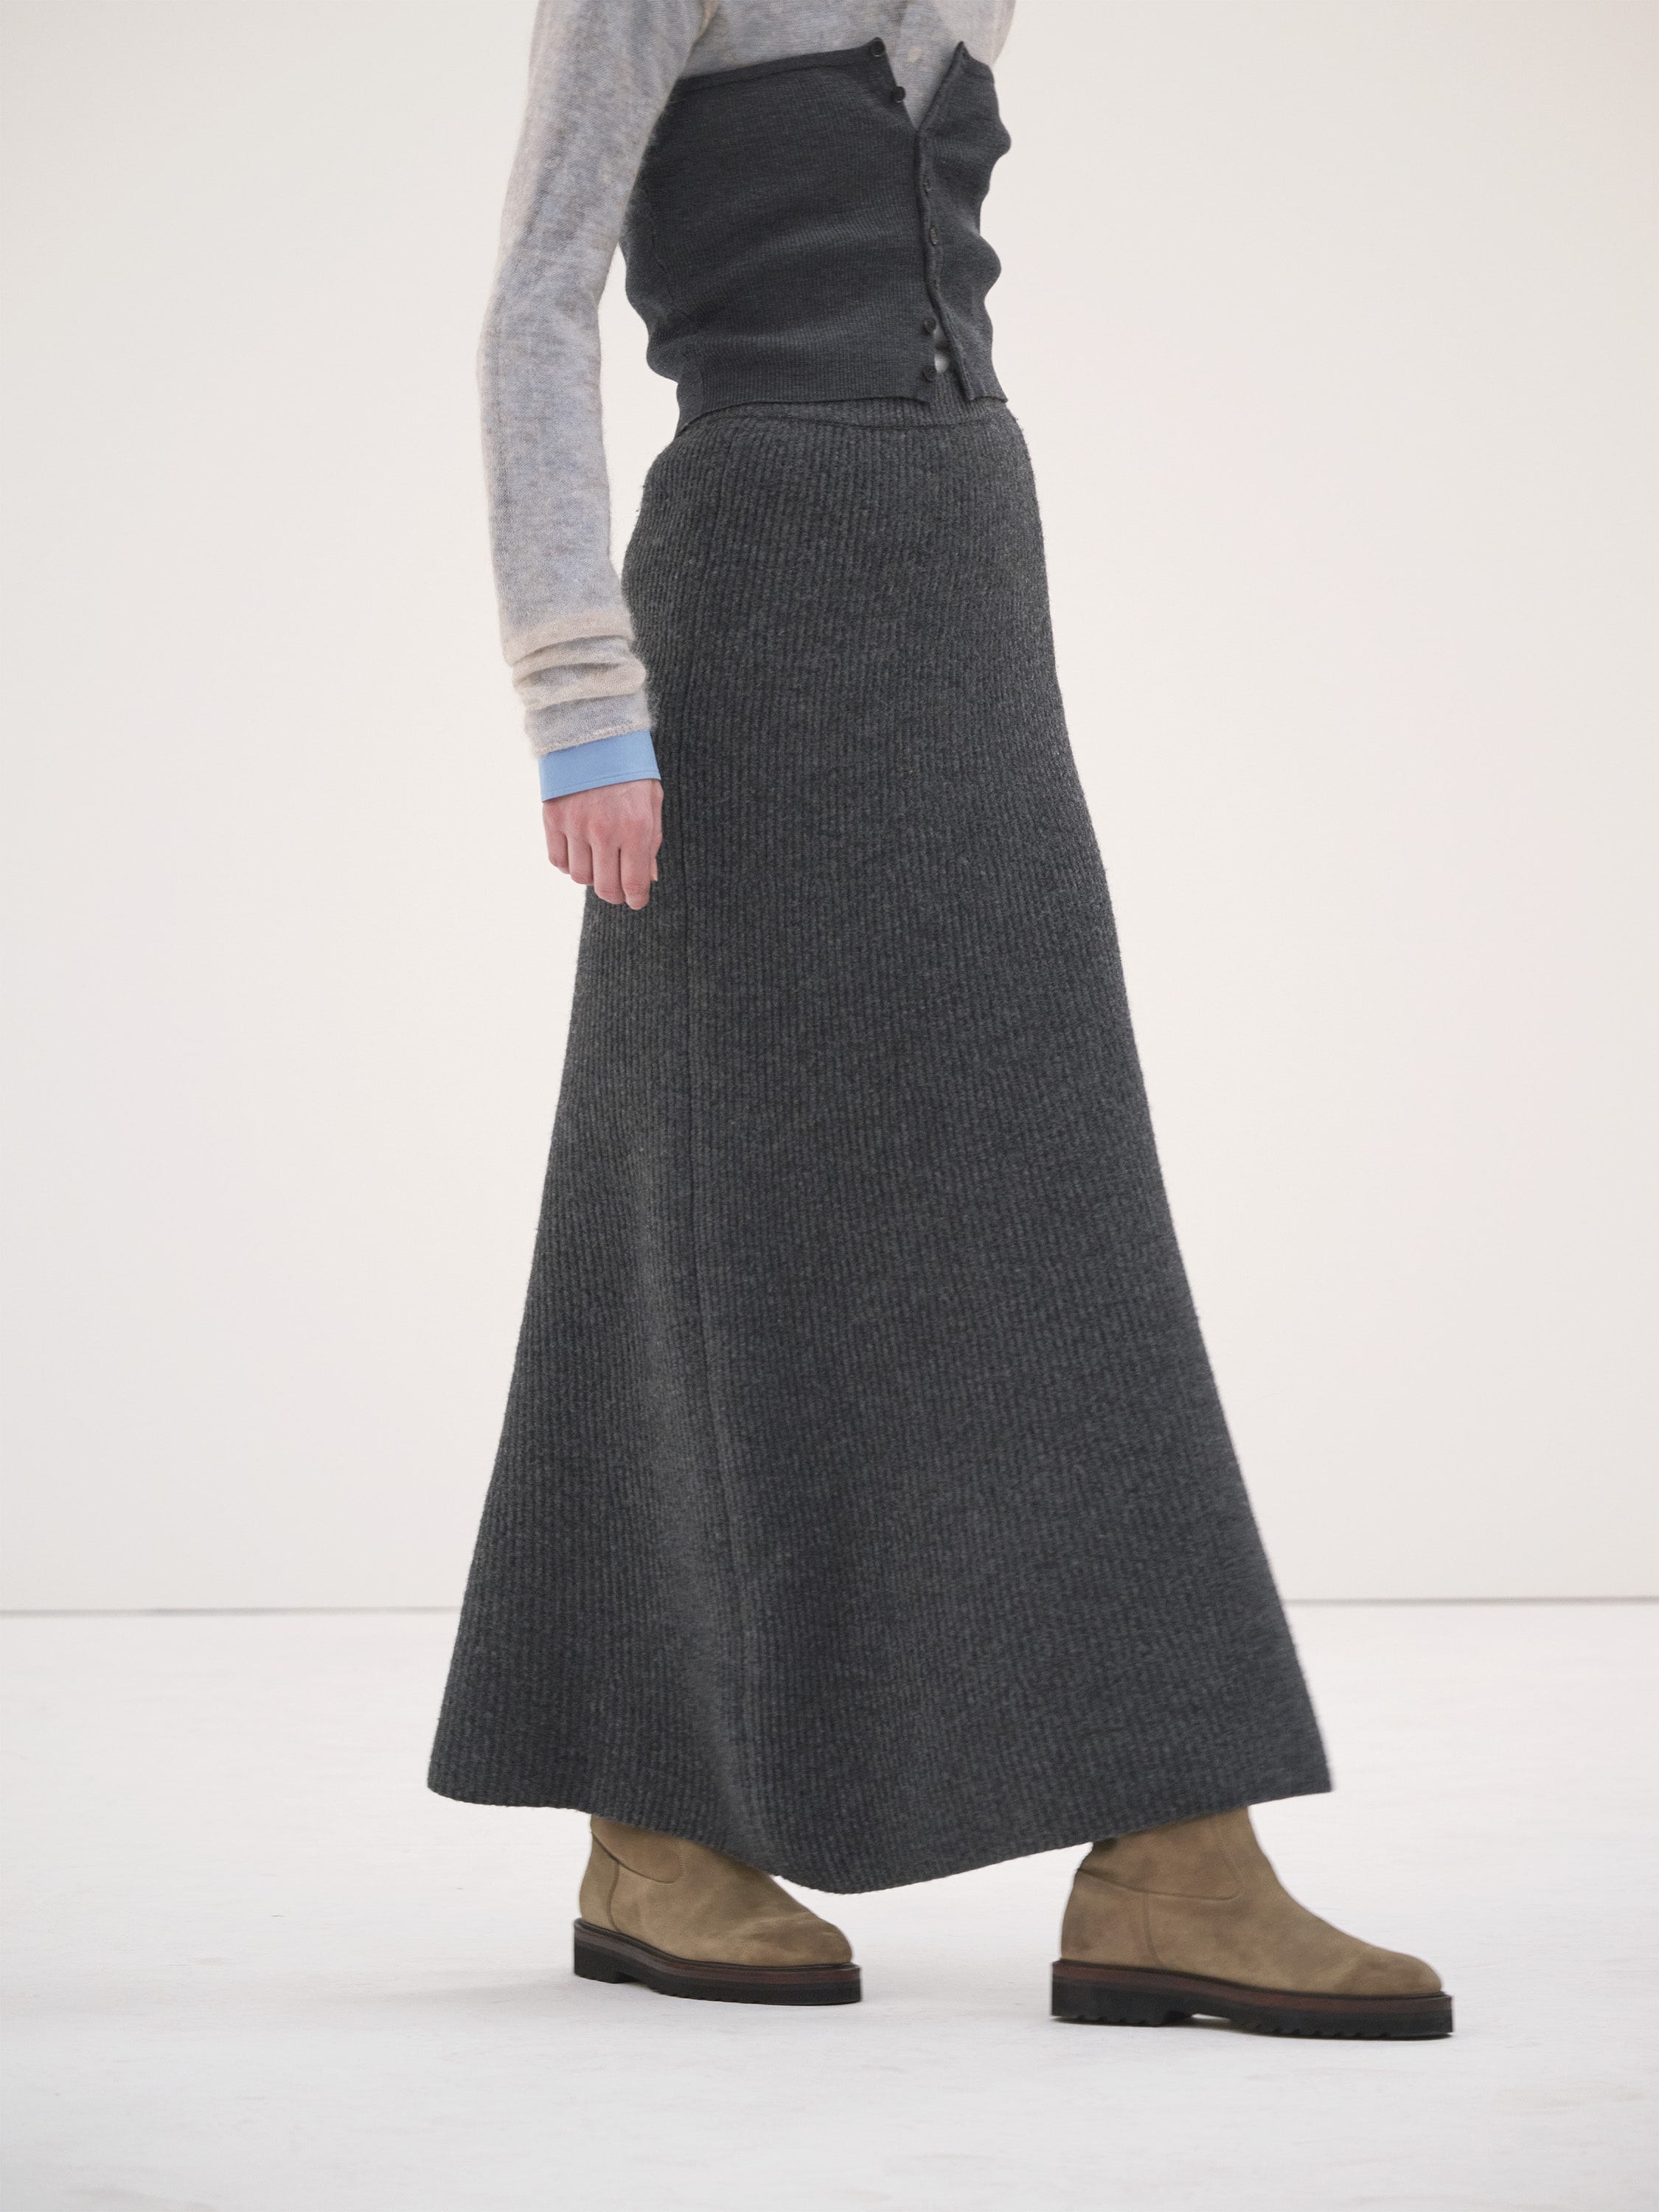 MILLED FRENCH MERINO RIB KNIT FLARE SKIRT 詳細画像 CHARCOAL GRAY 2